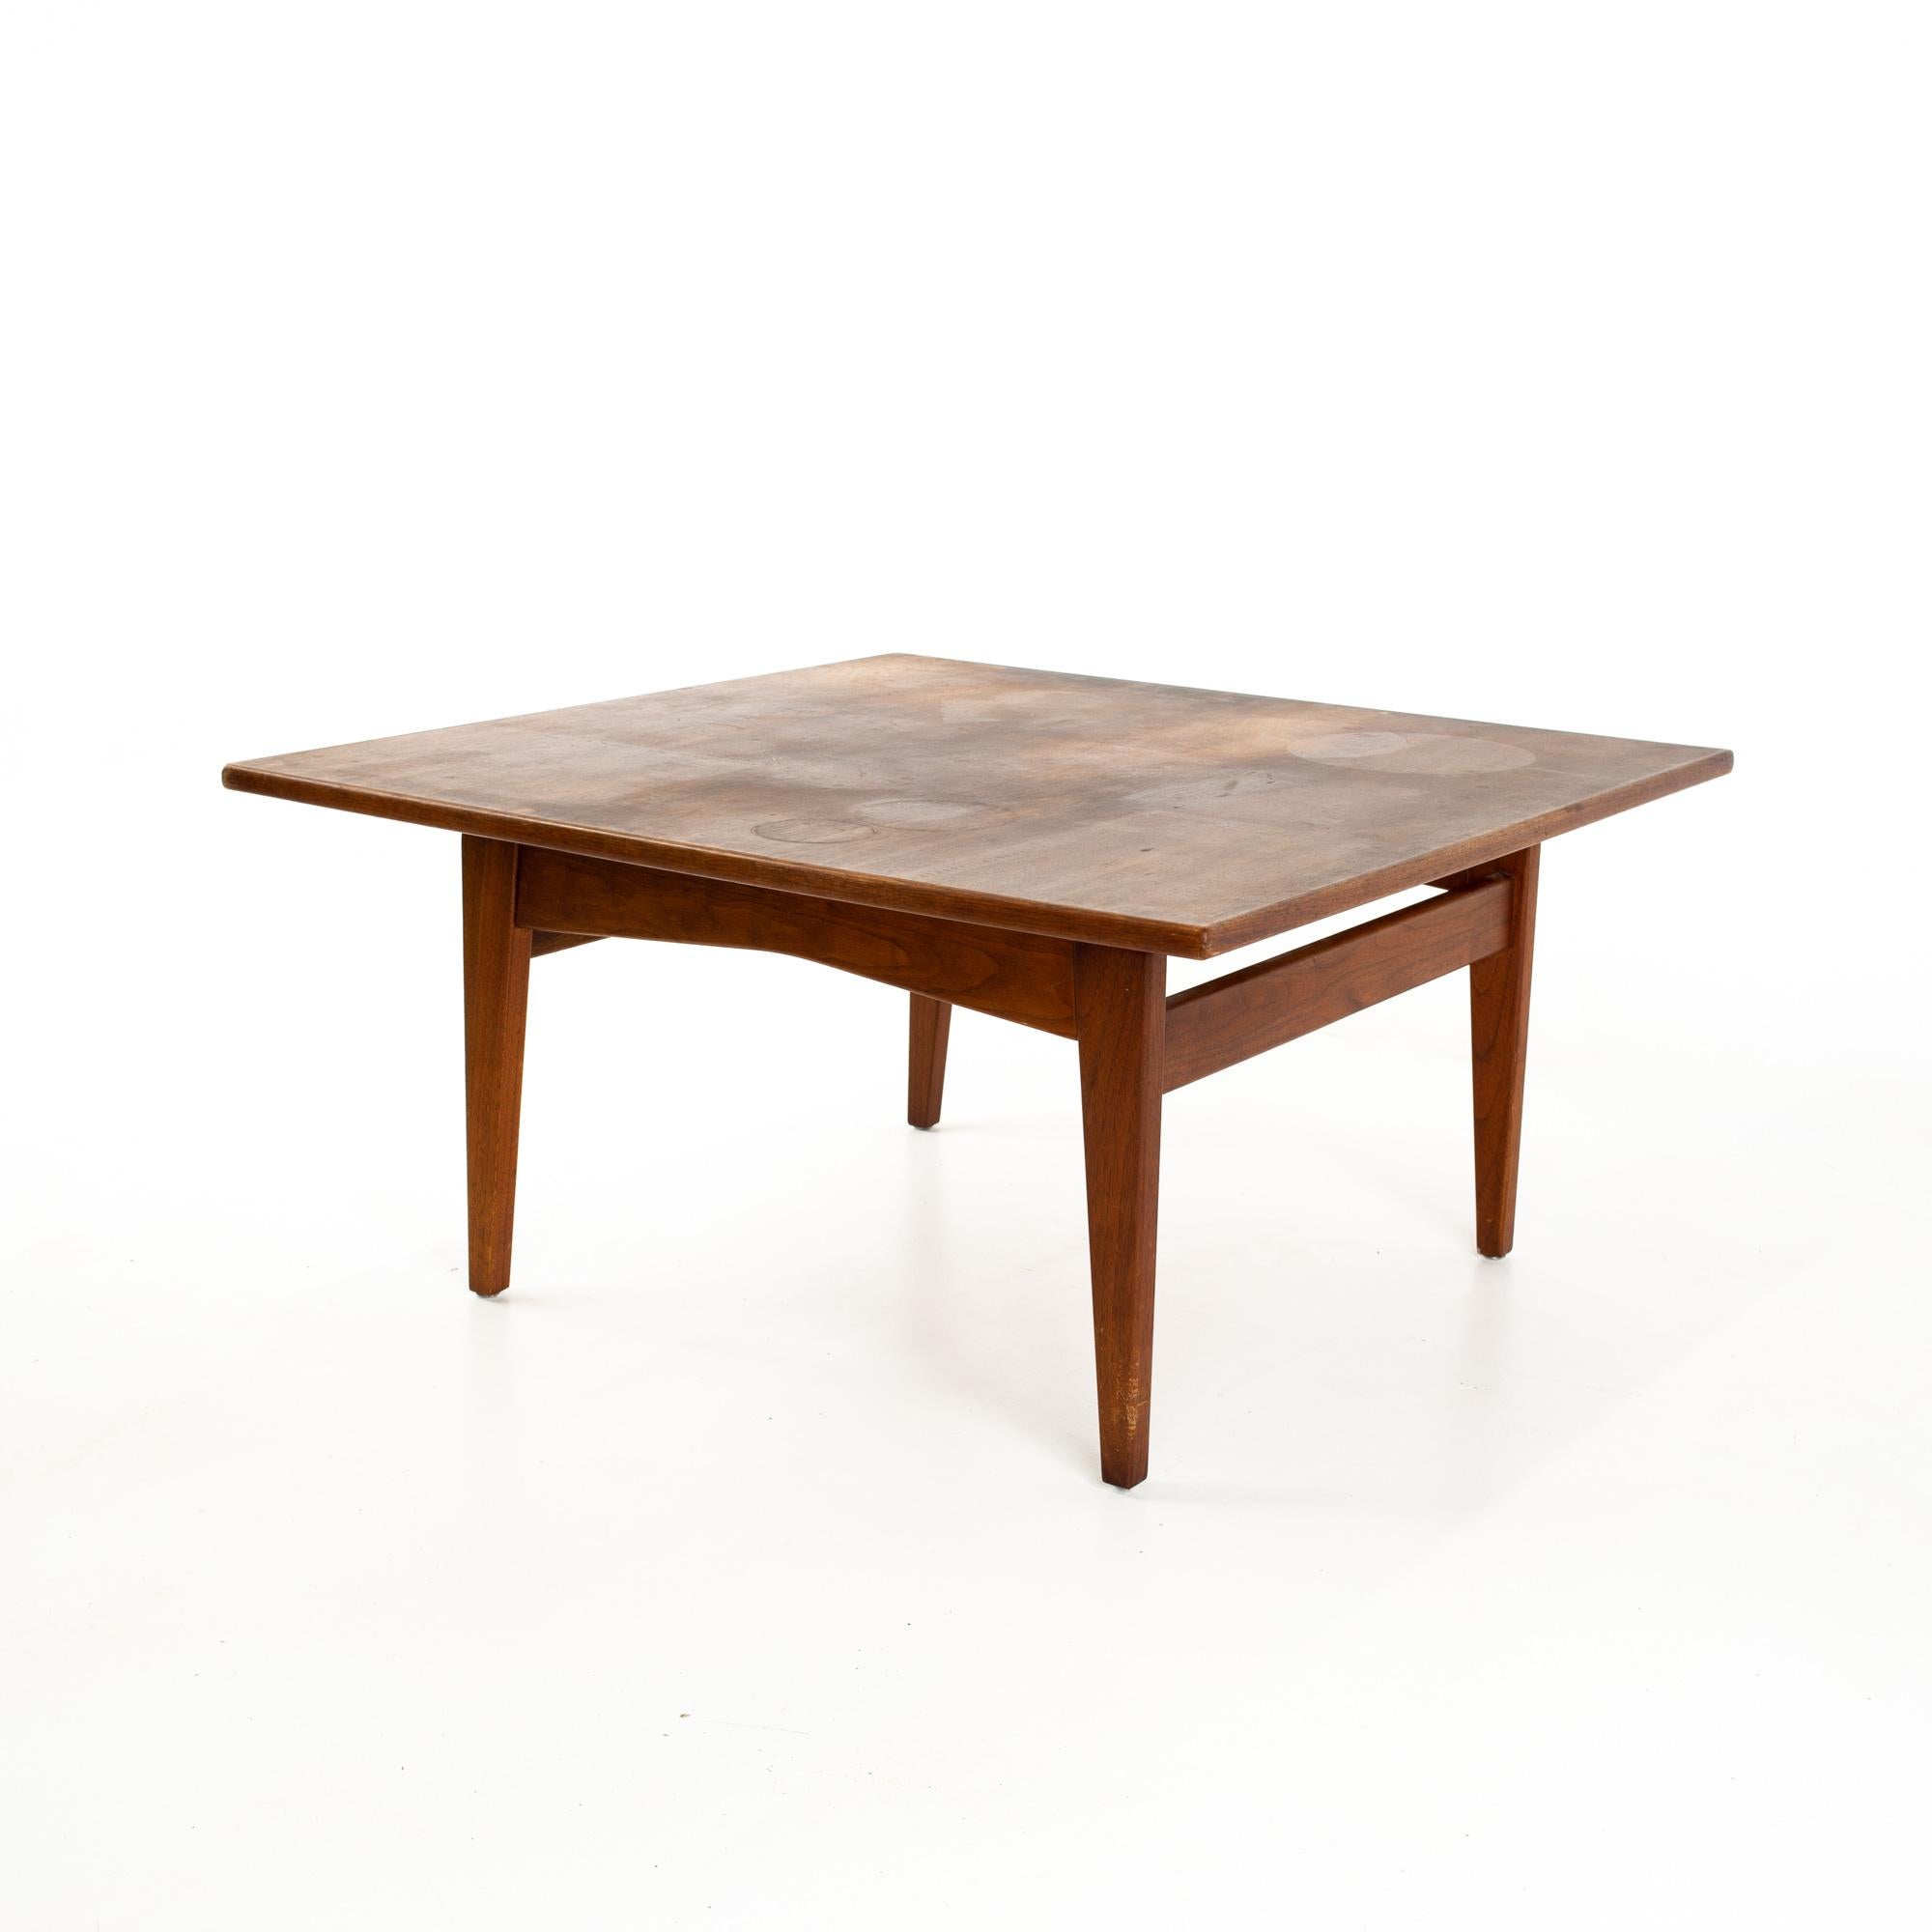 Jens Risom mid century coffee table.
Coffee table measures: 32 wide x 32 deep x 16 inches high

All pieces of furniture can be had in what we call restored vintage condition. That means the piece is restored upon purchase so it’s free of